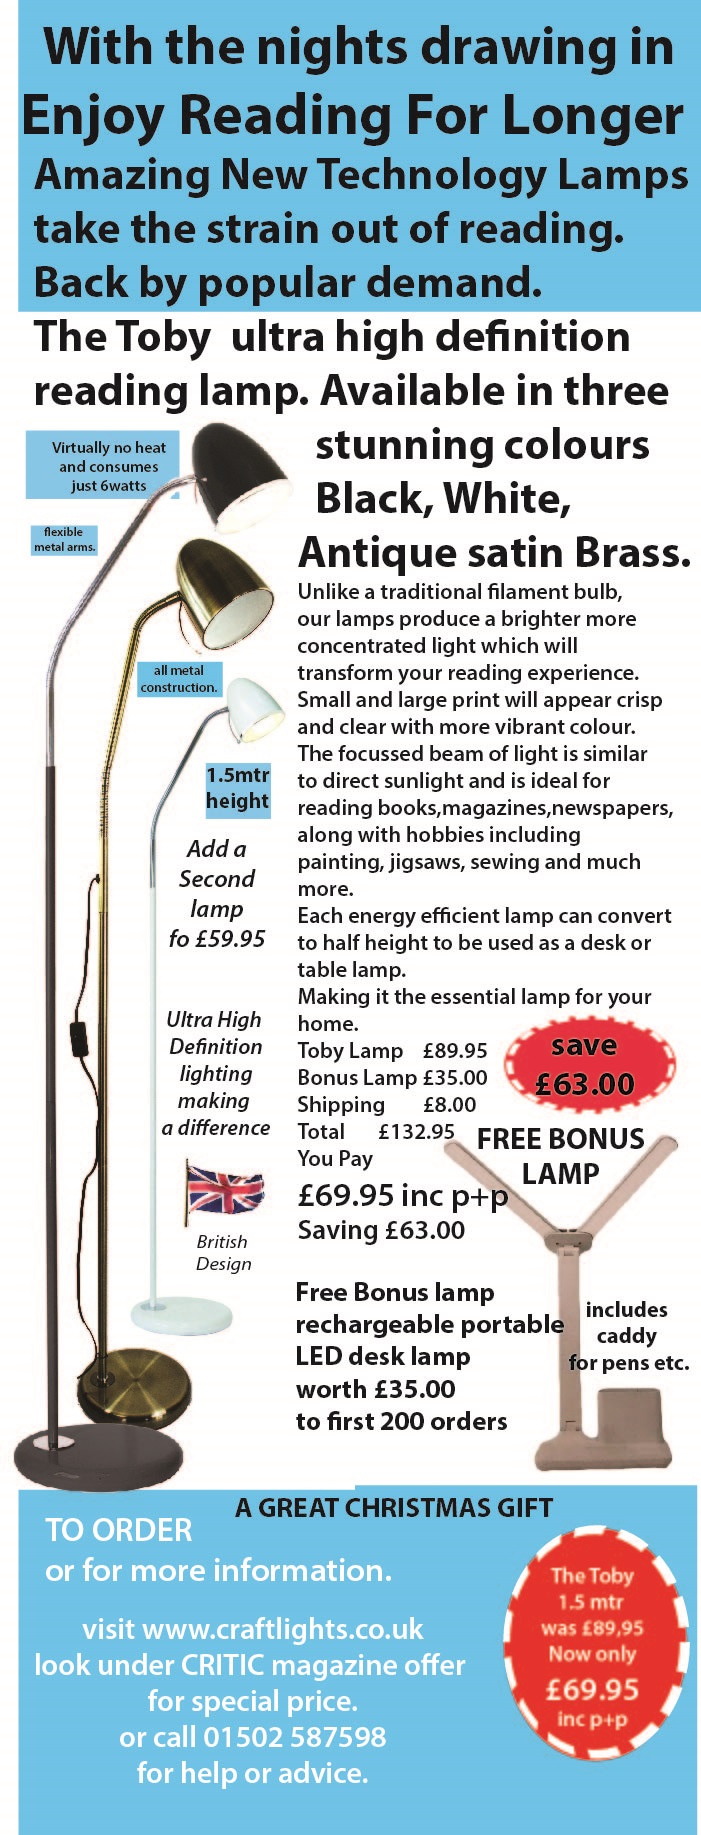 CRITIC MAGAZINE EXCLUSIVE OFFER with bonus twin rechargeable lamp.